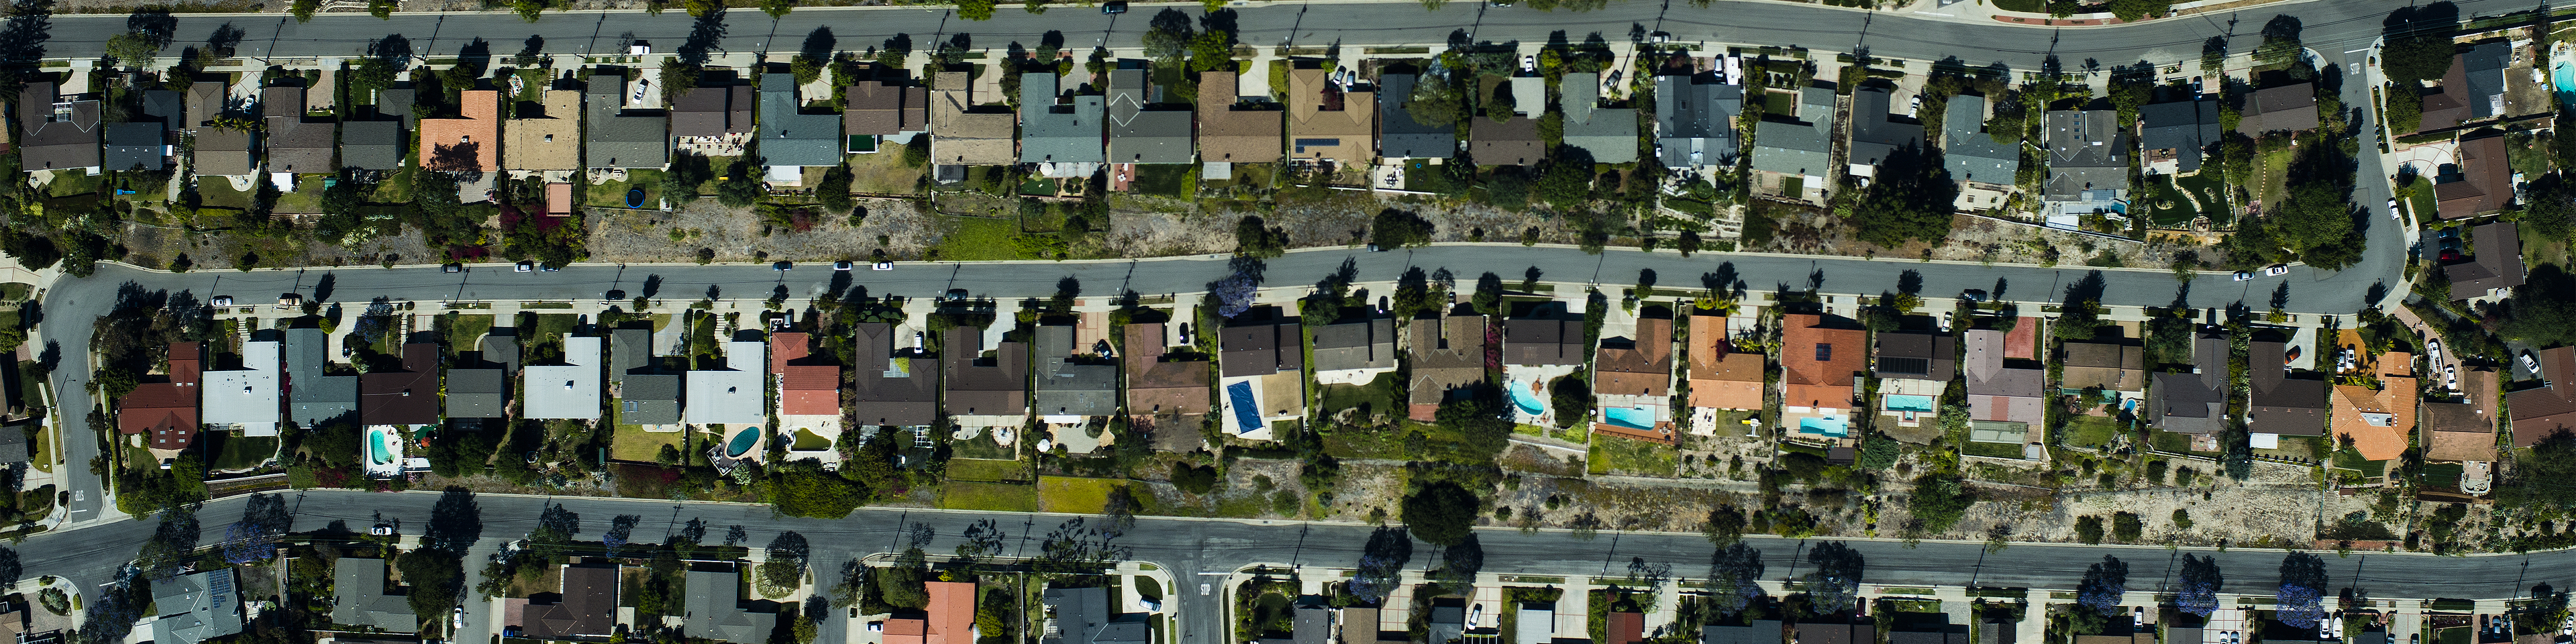 An aerial view of suburban housing and garden ,